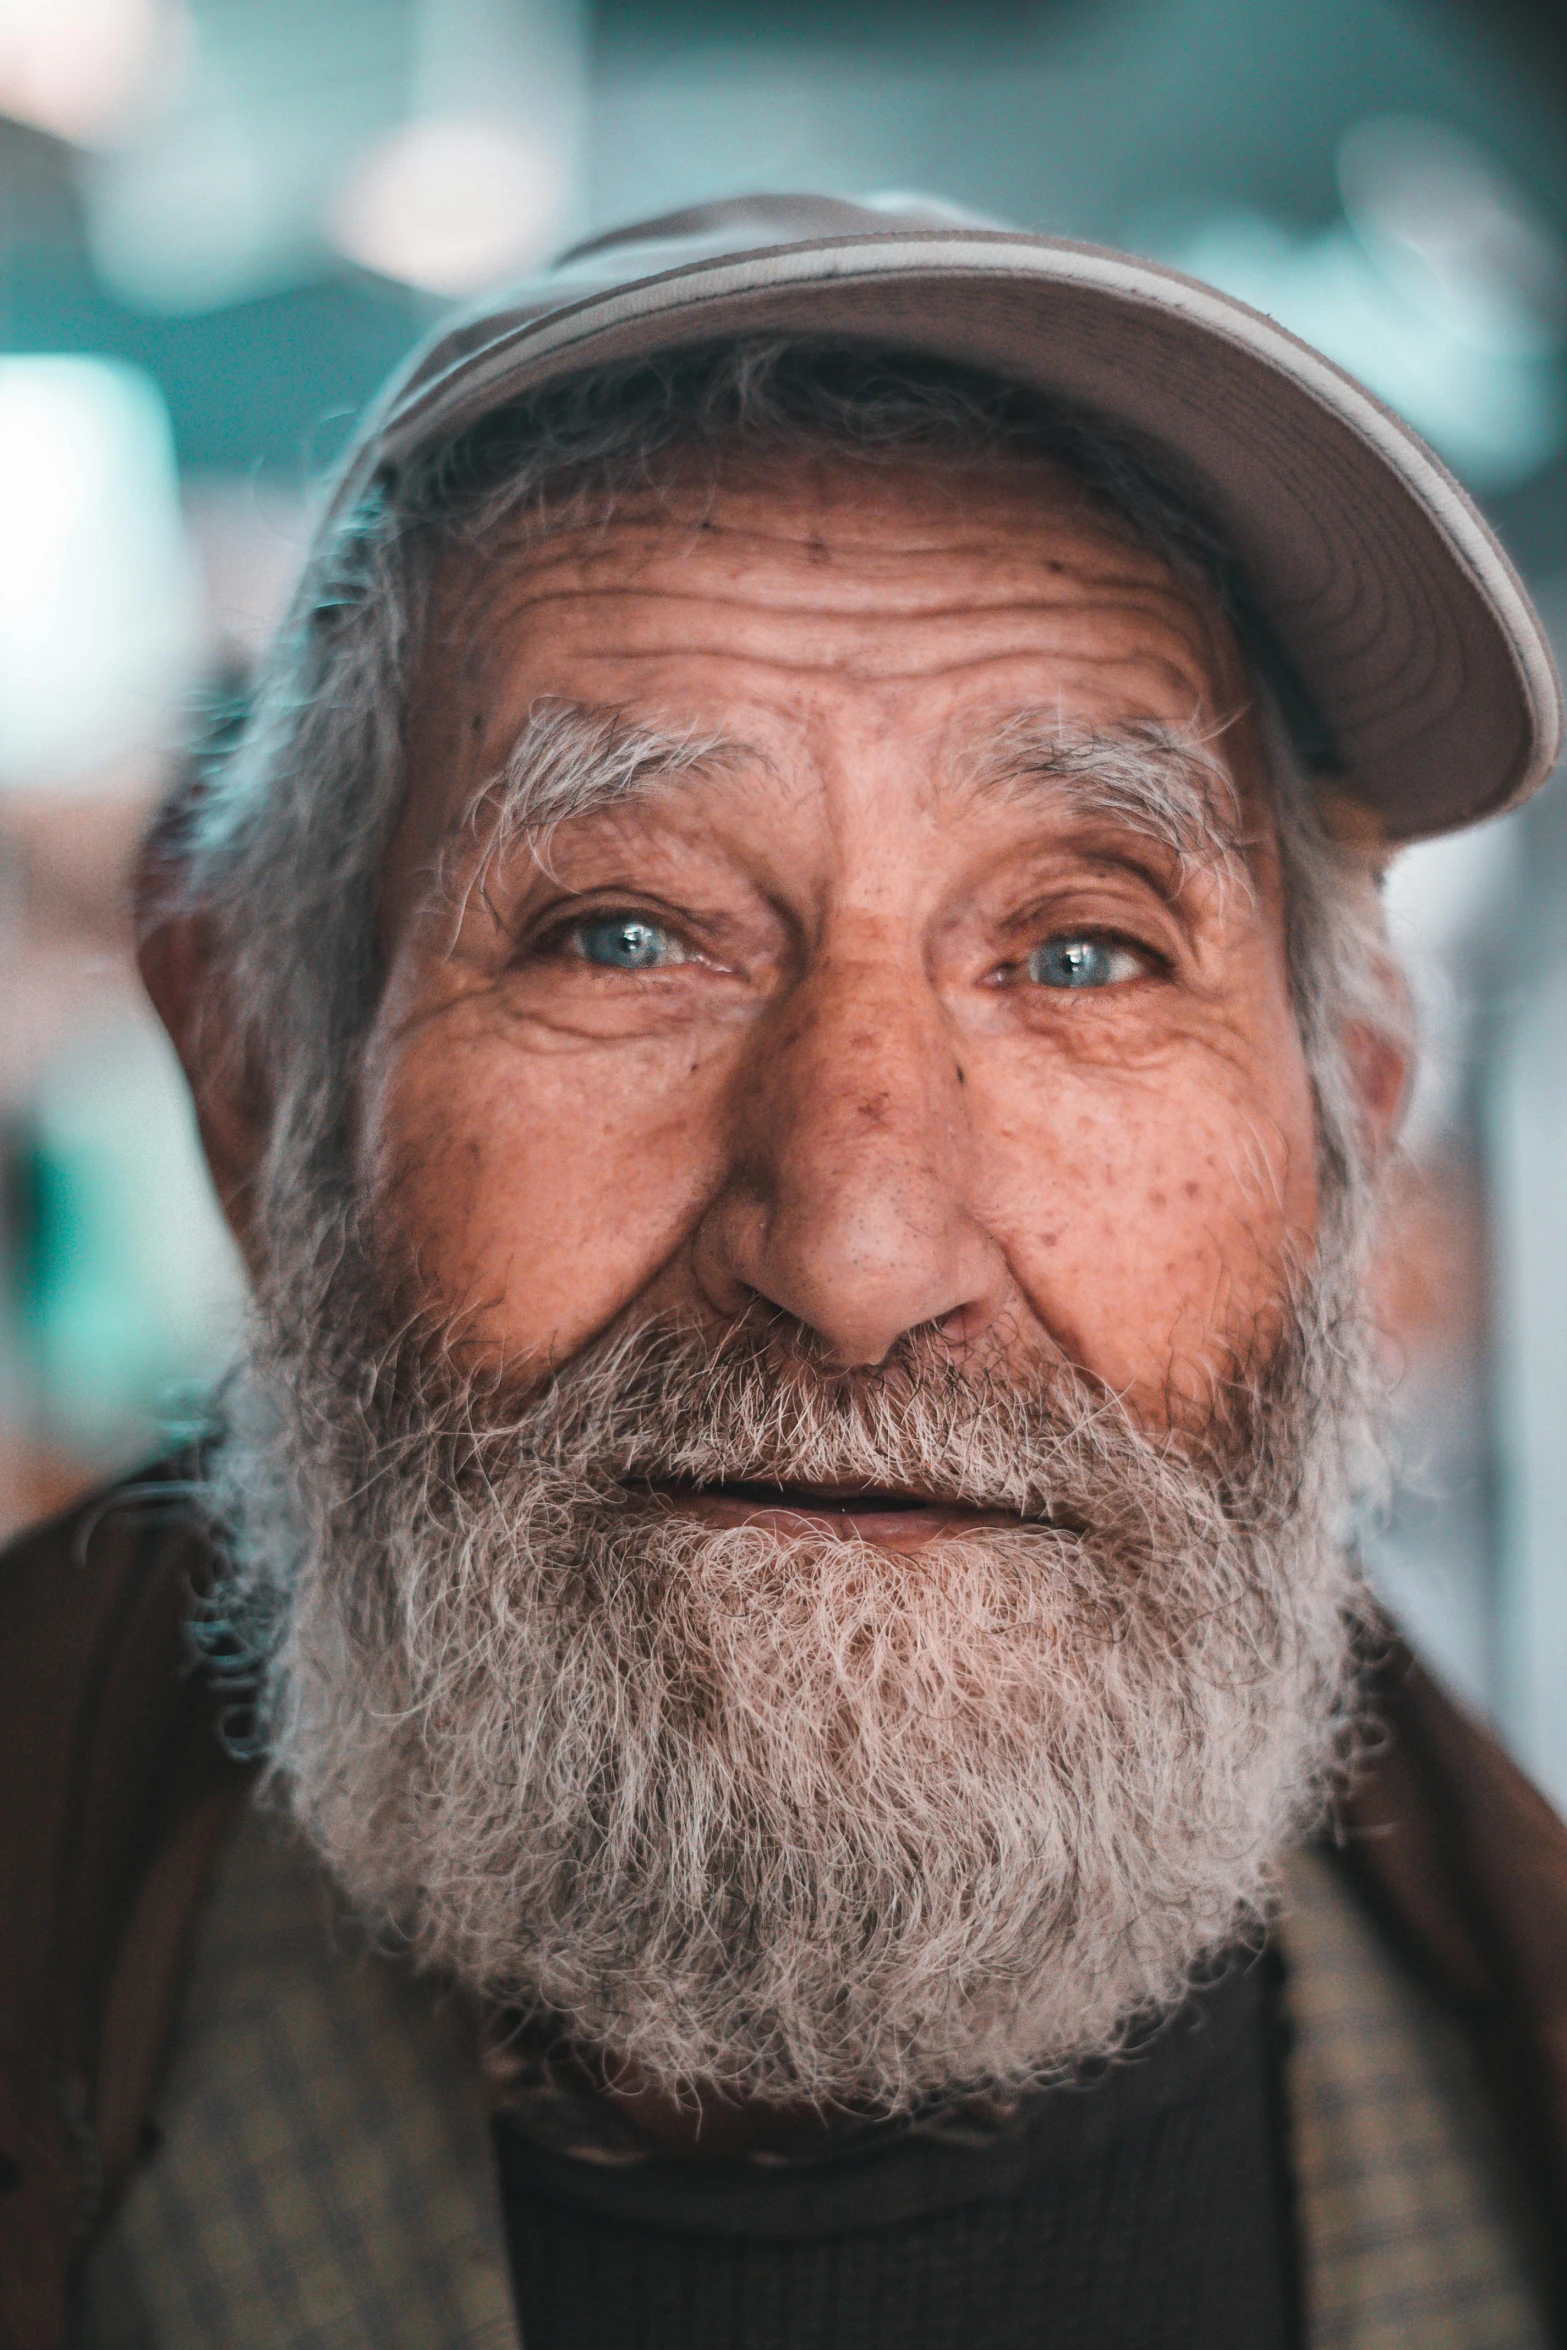 old man with beard and hat posing for camera